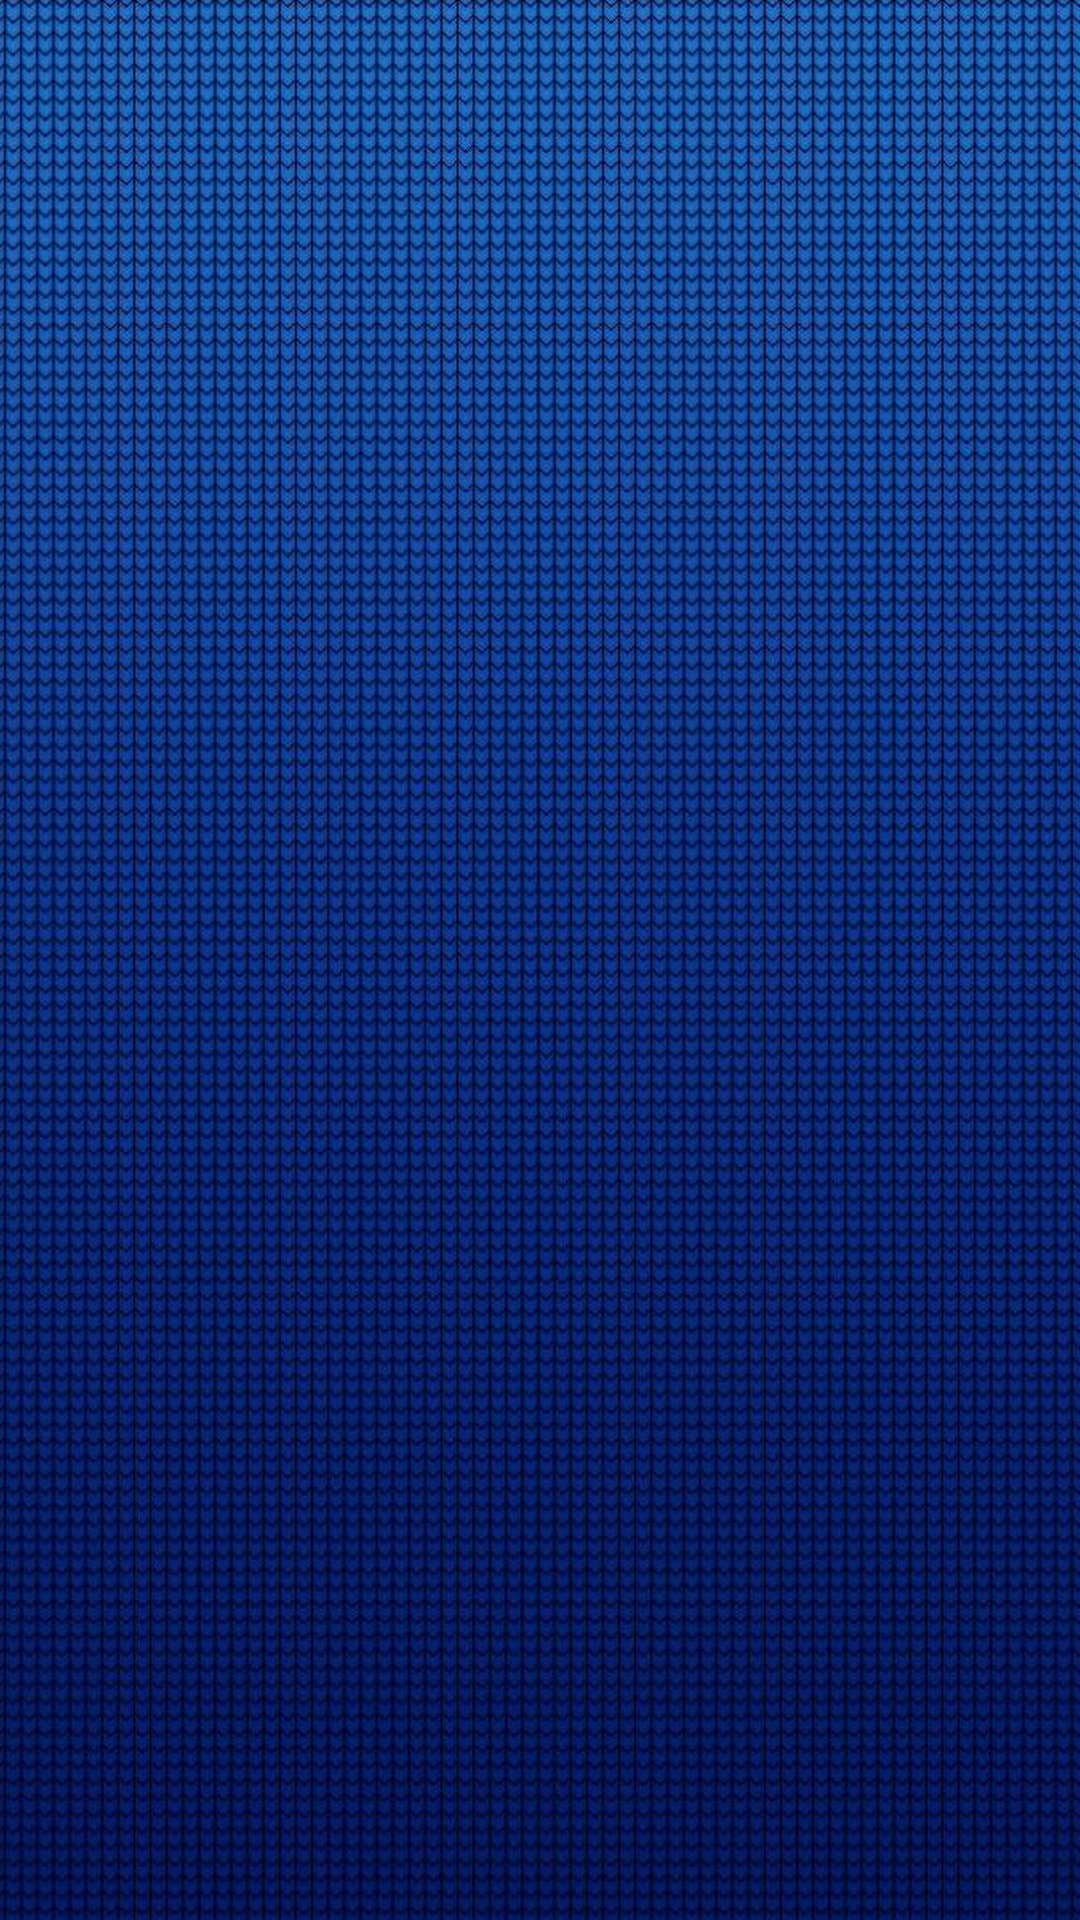 Android Wallpaper Blue With high-resolution 1080X1920 pixel. You can use this wallpaper for your Android backgrounds, Tablet, Samsung Screensavers, Mobile Phone Lock Screen and another Smartphones device